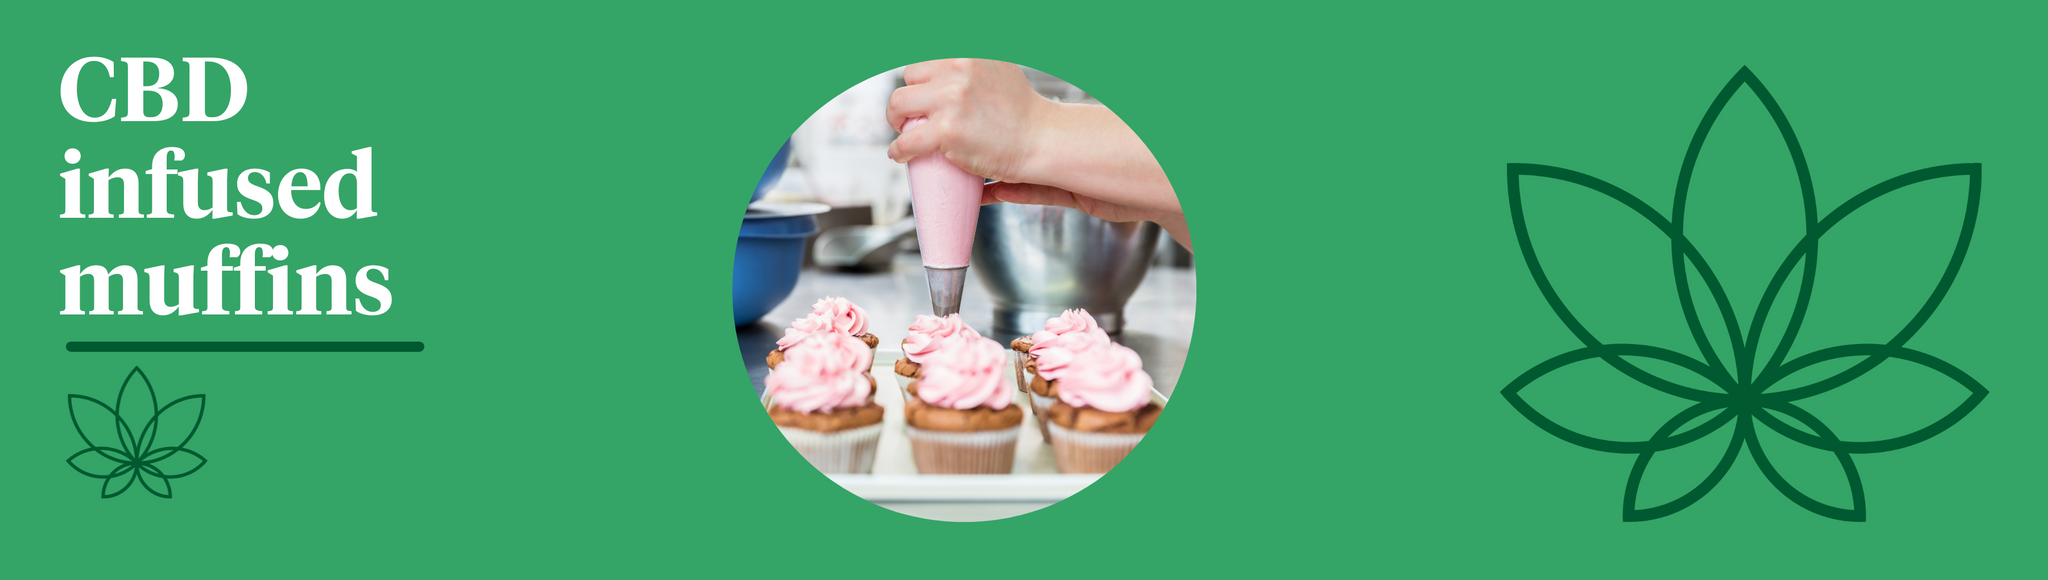 A green background with the Supreme CBD logo to the right and a selection of cbd infused muffins in the centre showing the best way to take CBD oil.